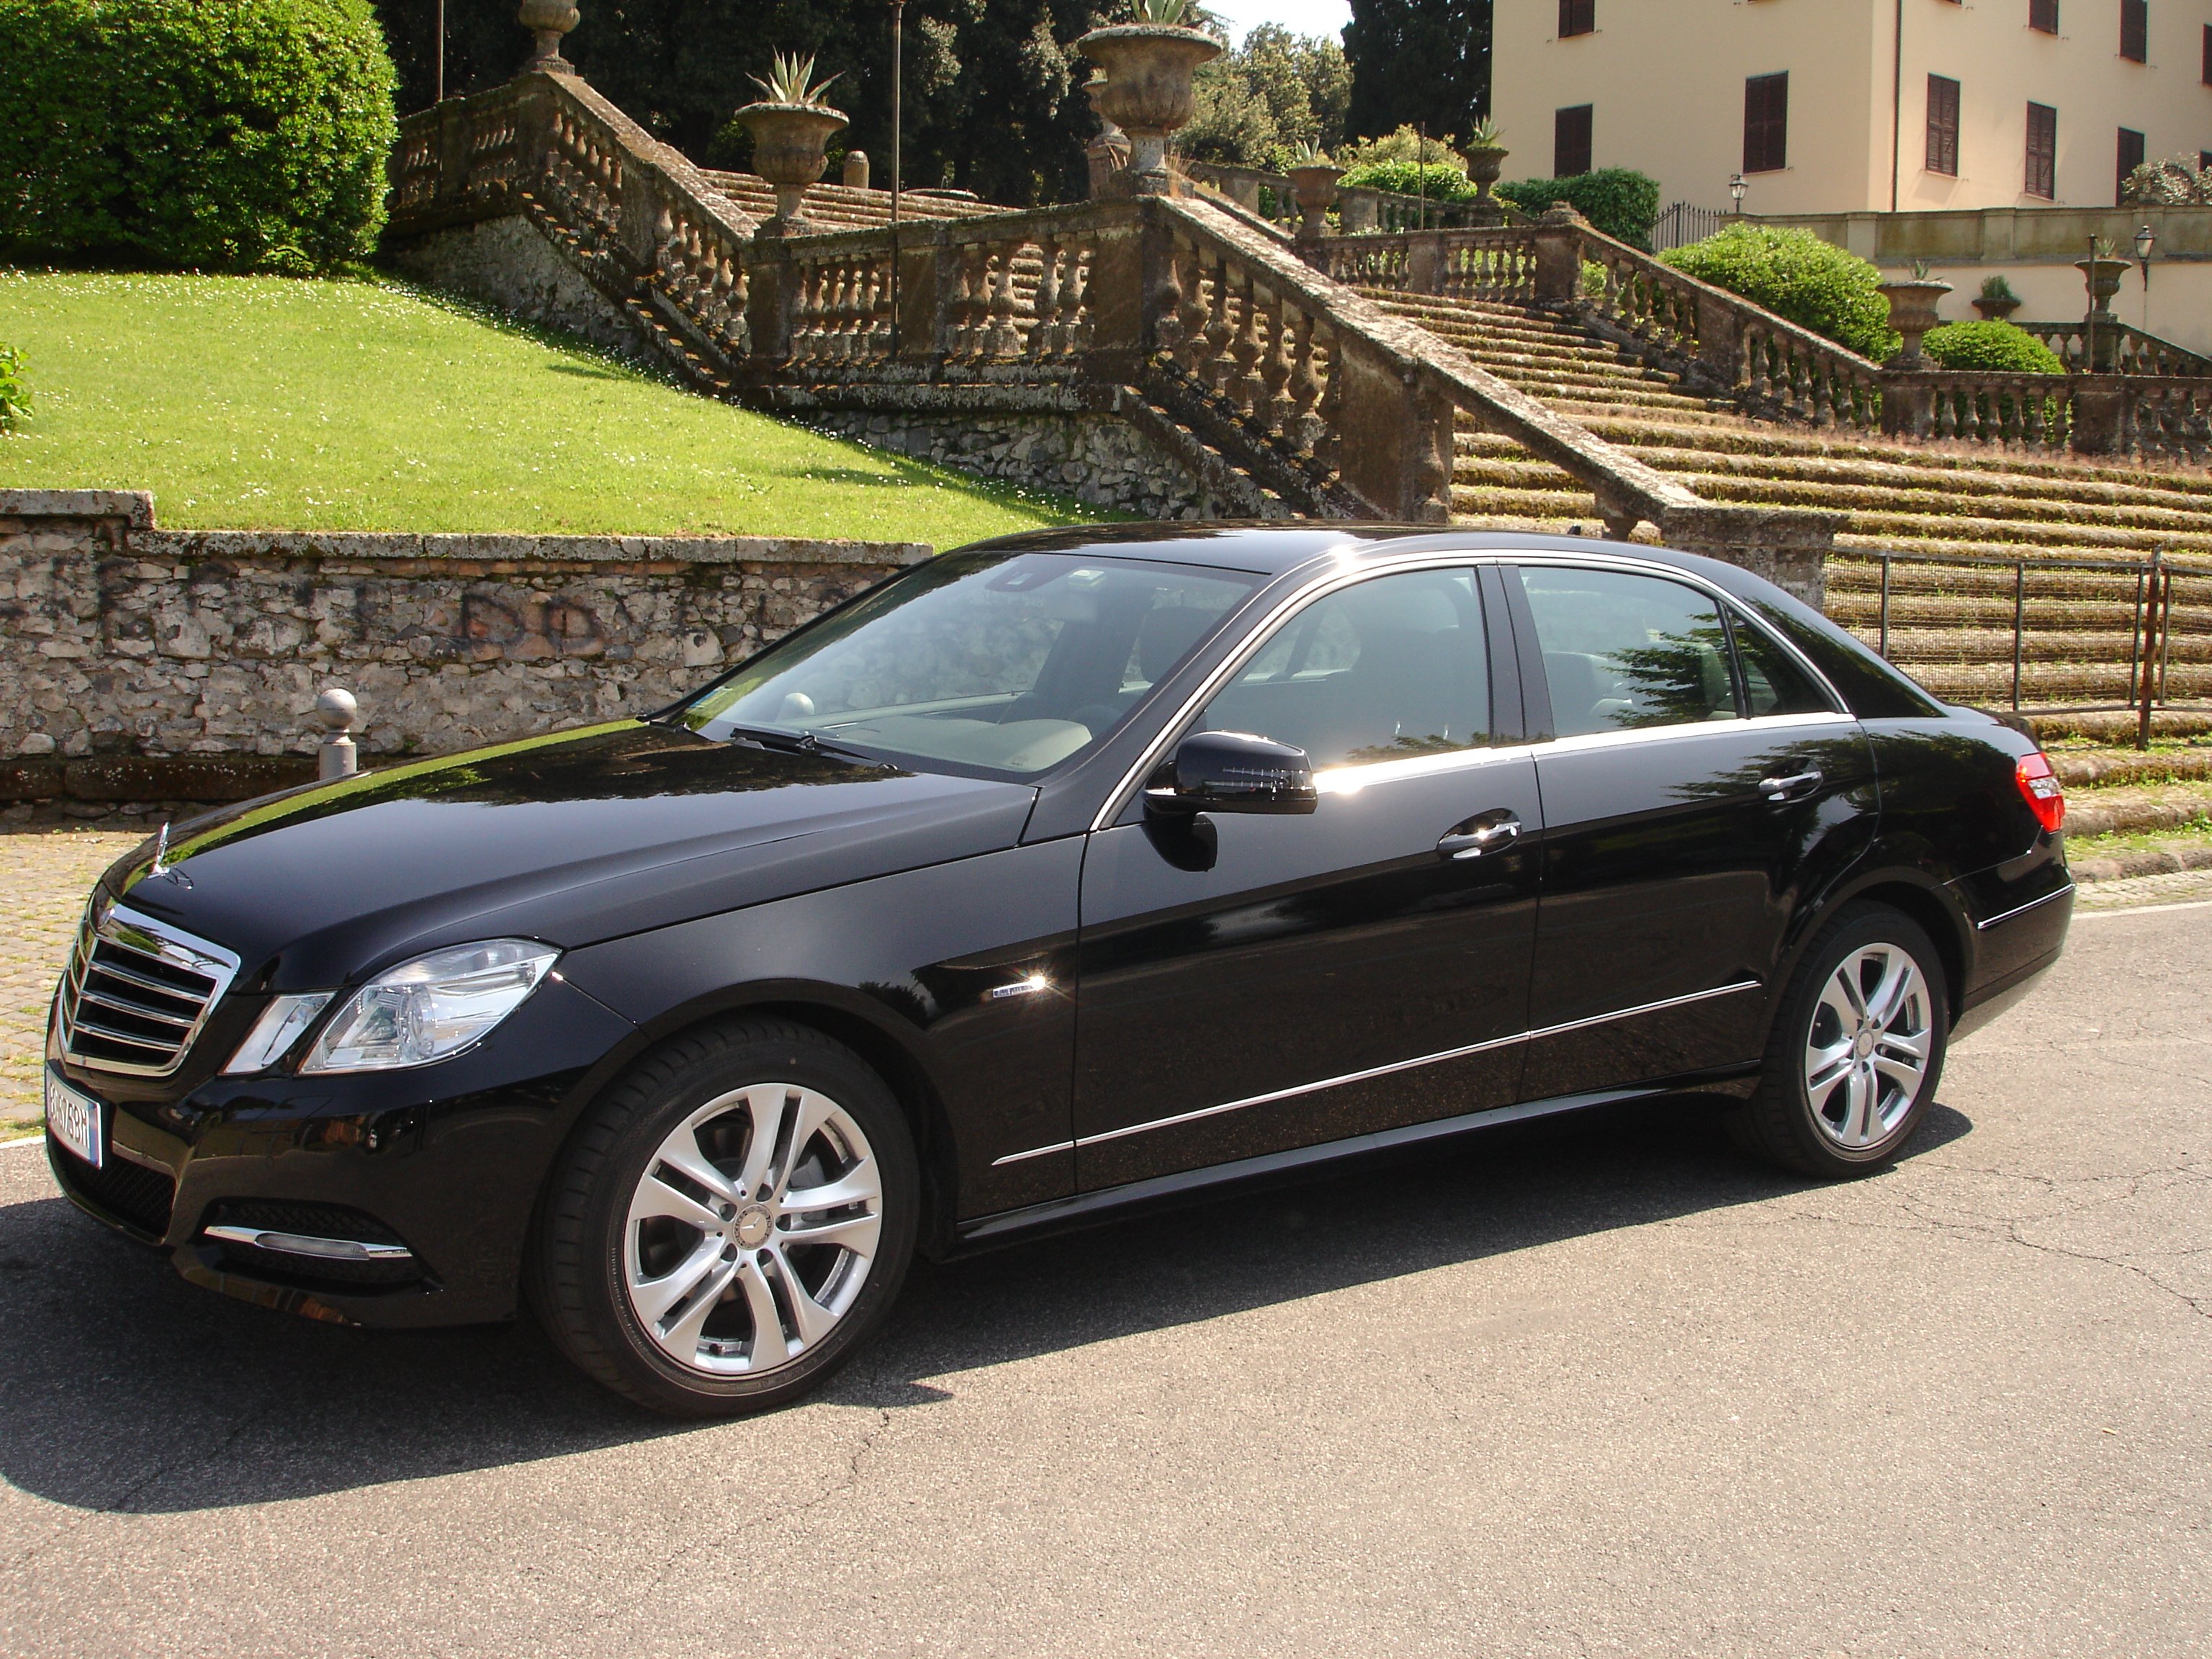 Andrea Amore Chauffeur Services